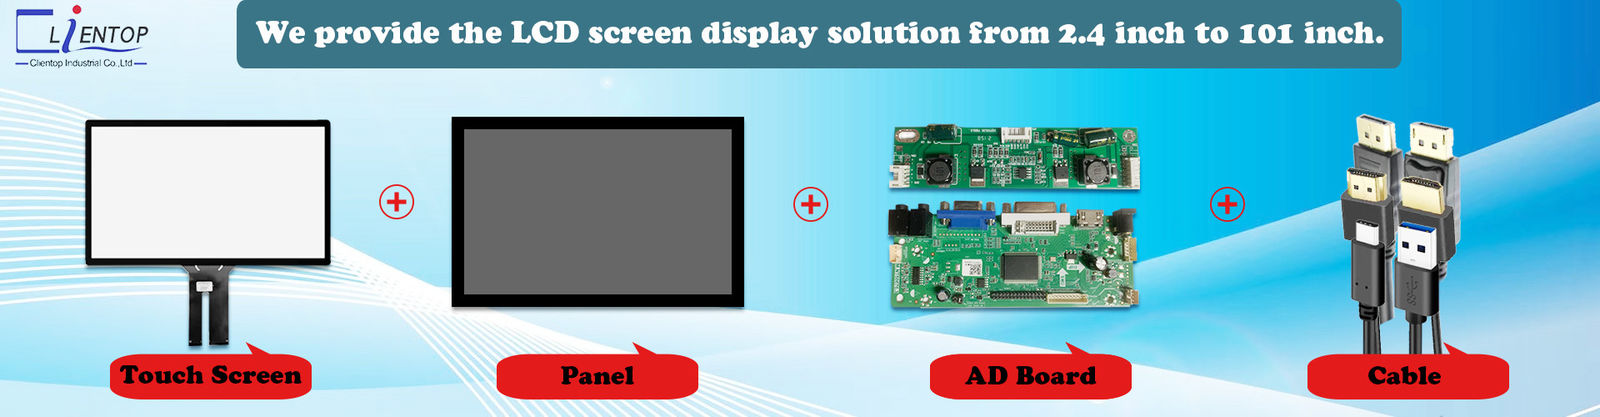 Stretched Bar LCD Display